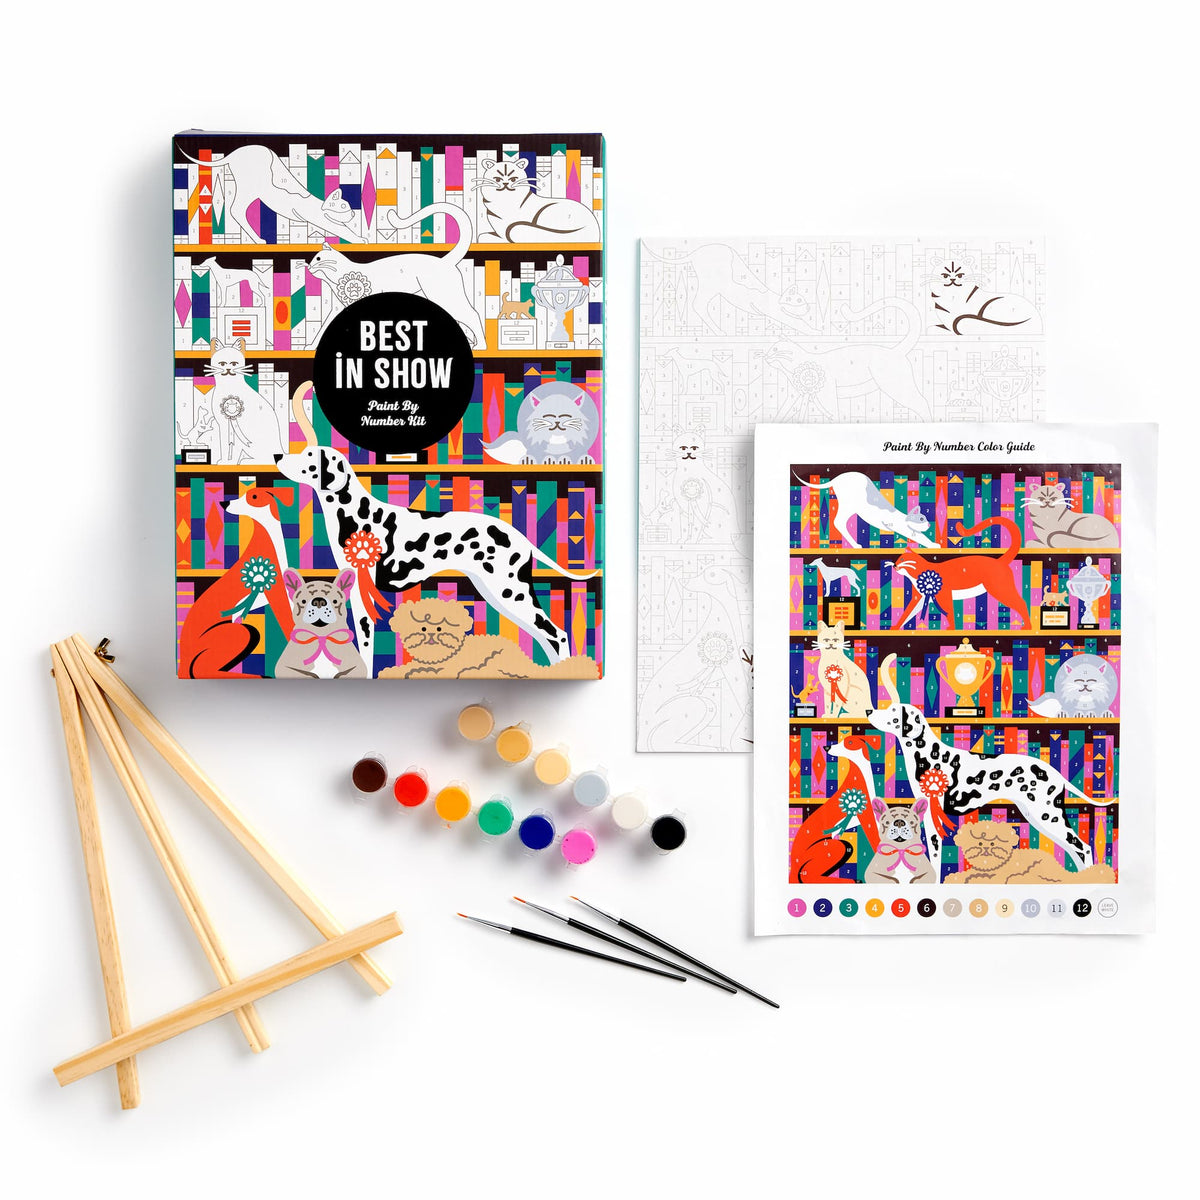 14 Paint-by-Number Kits Anyone Can Do